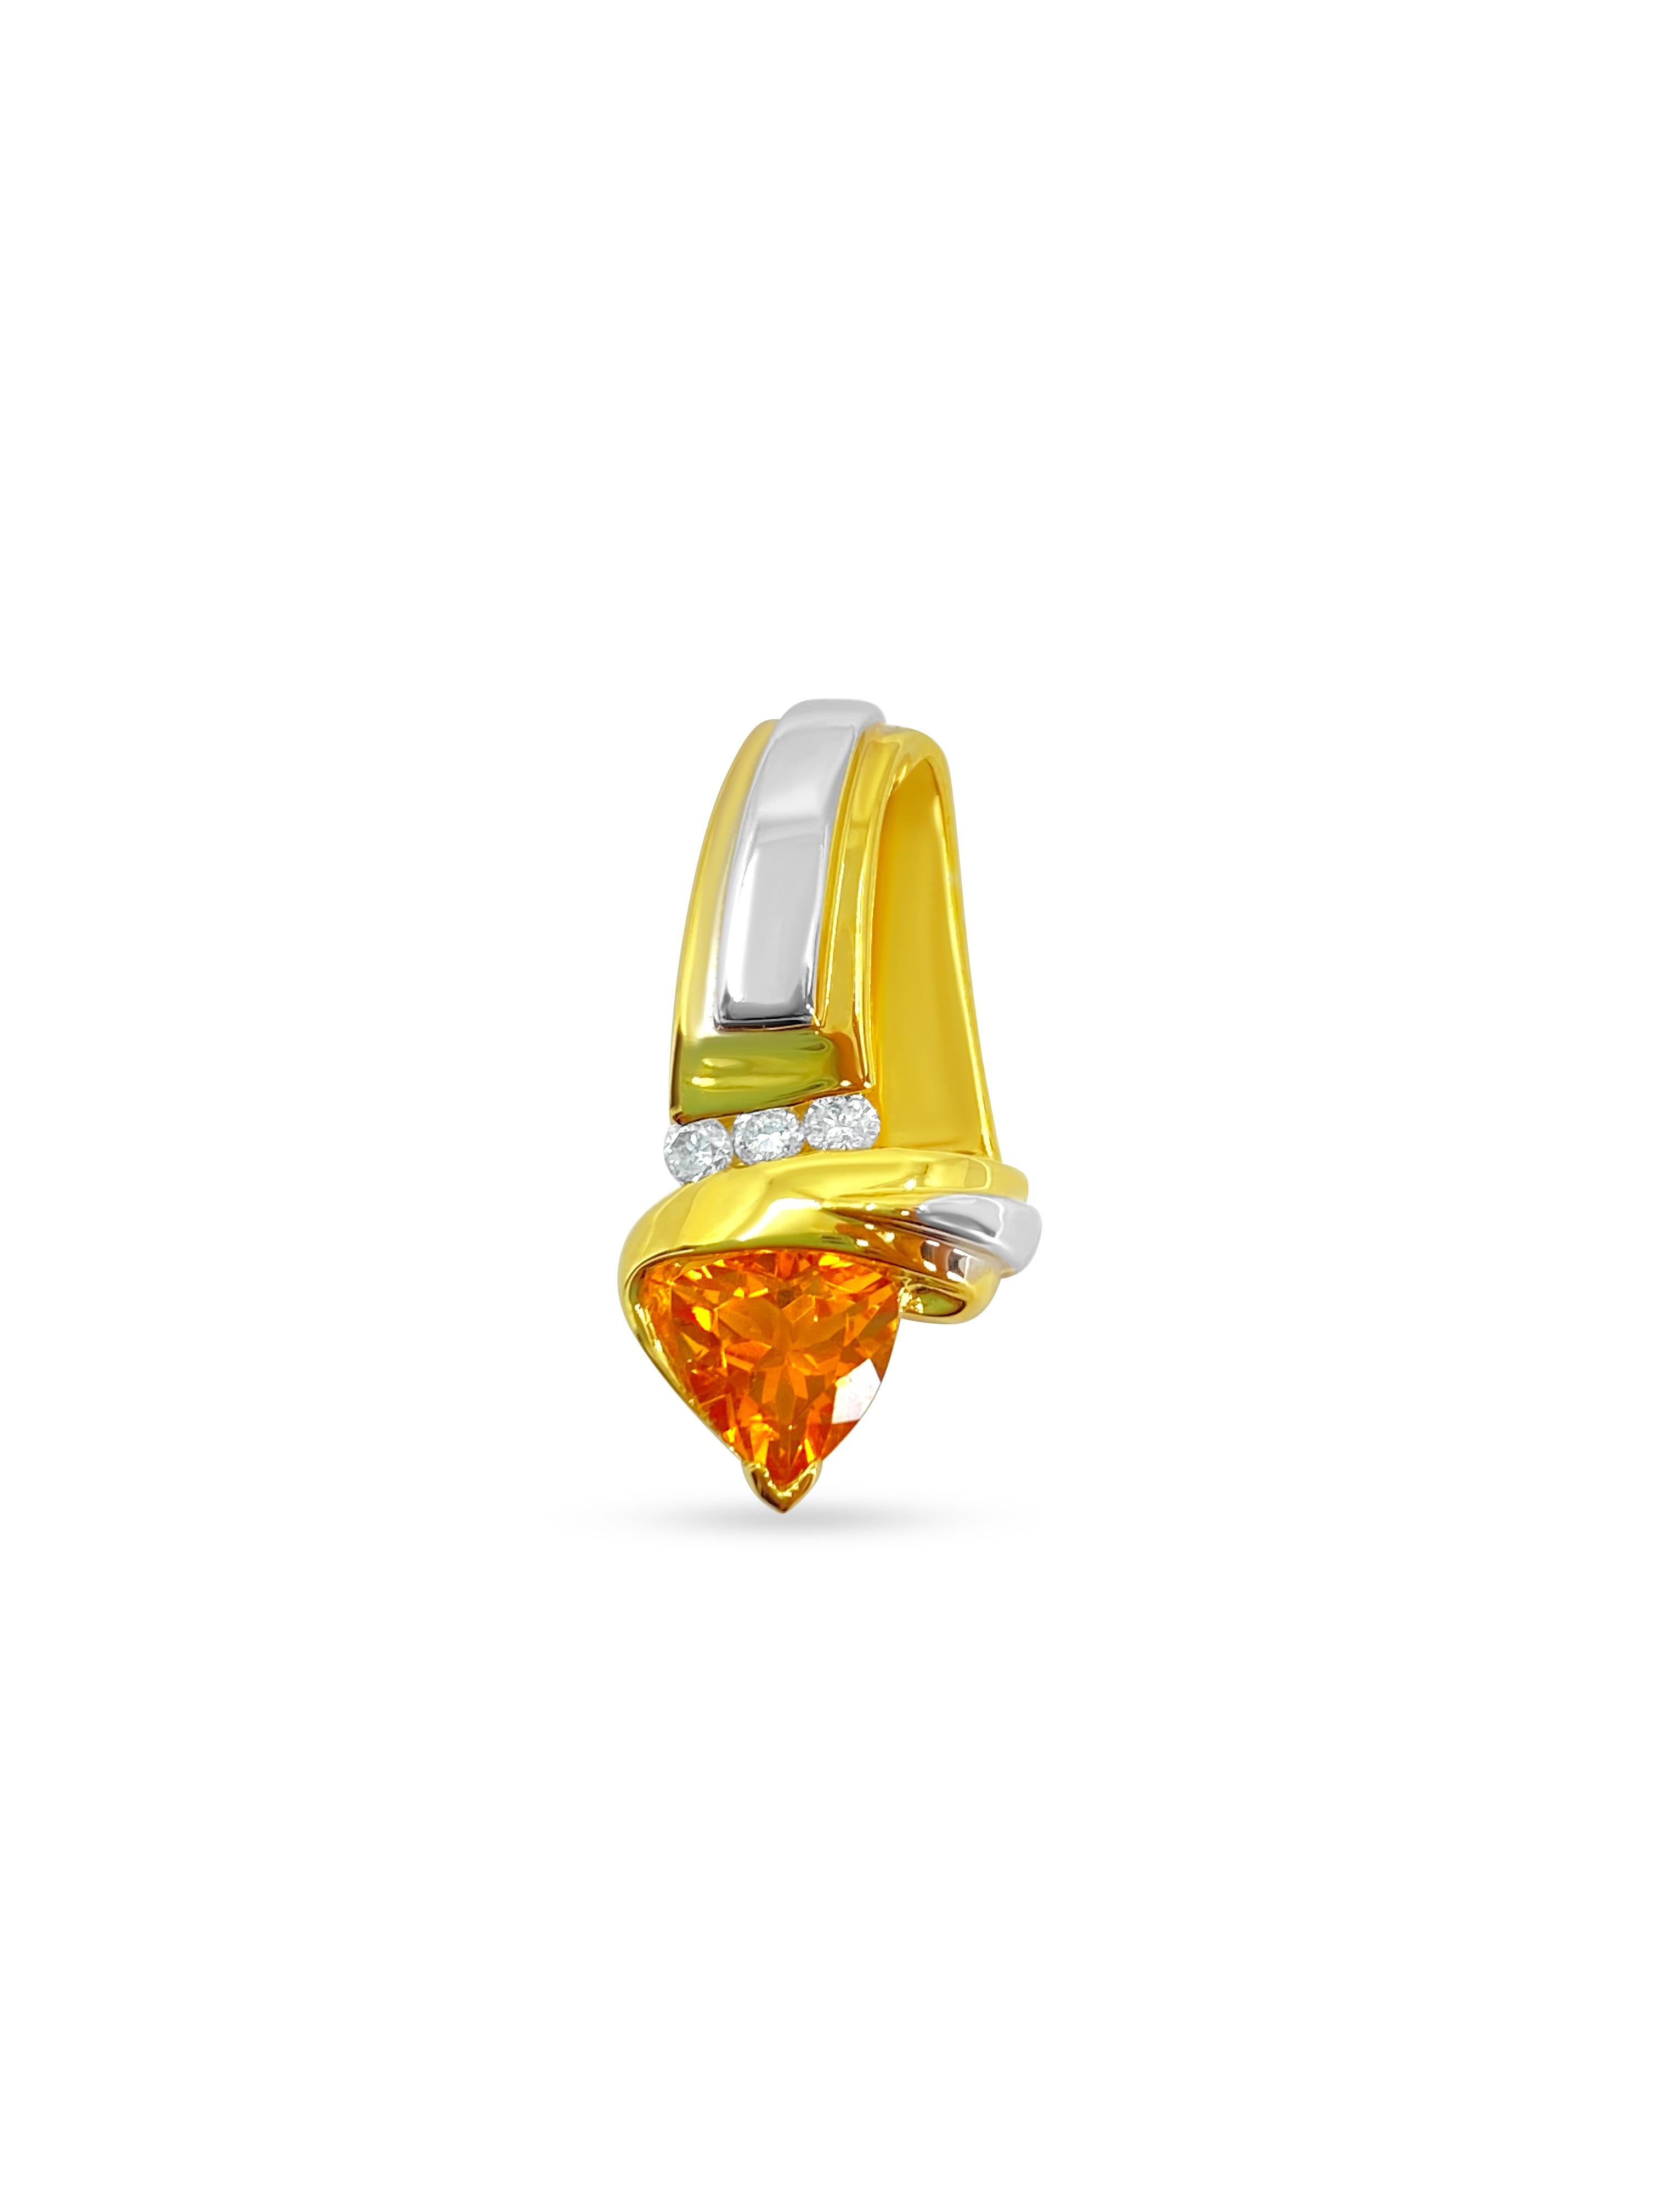 Crafted from 14k yellow gold, this exquisite ring showcases a stunning 2.50-carat orange sapphire accented by a total of 0.21 carats of diamonds. With SI clarity and G color, all gemstones are 100% natural earth mined, ensuring exceptional quality